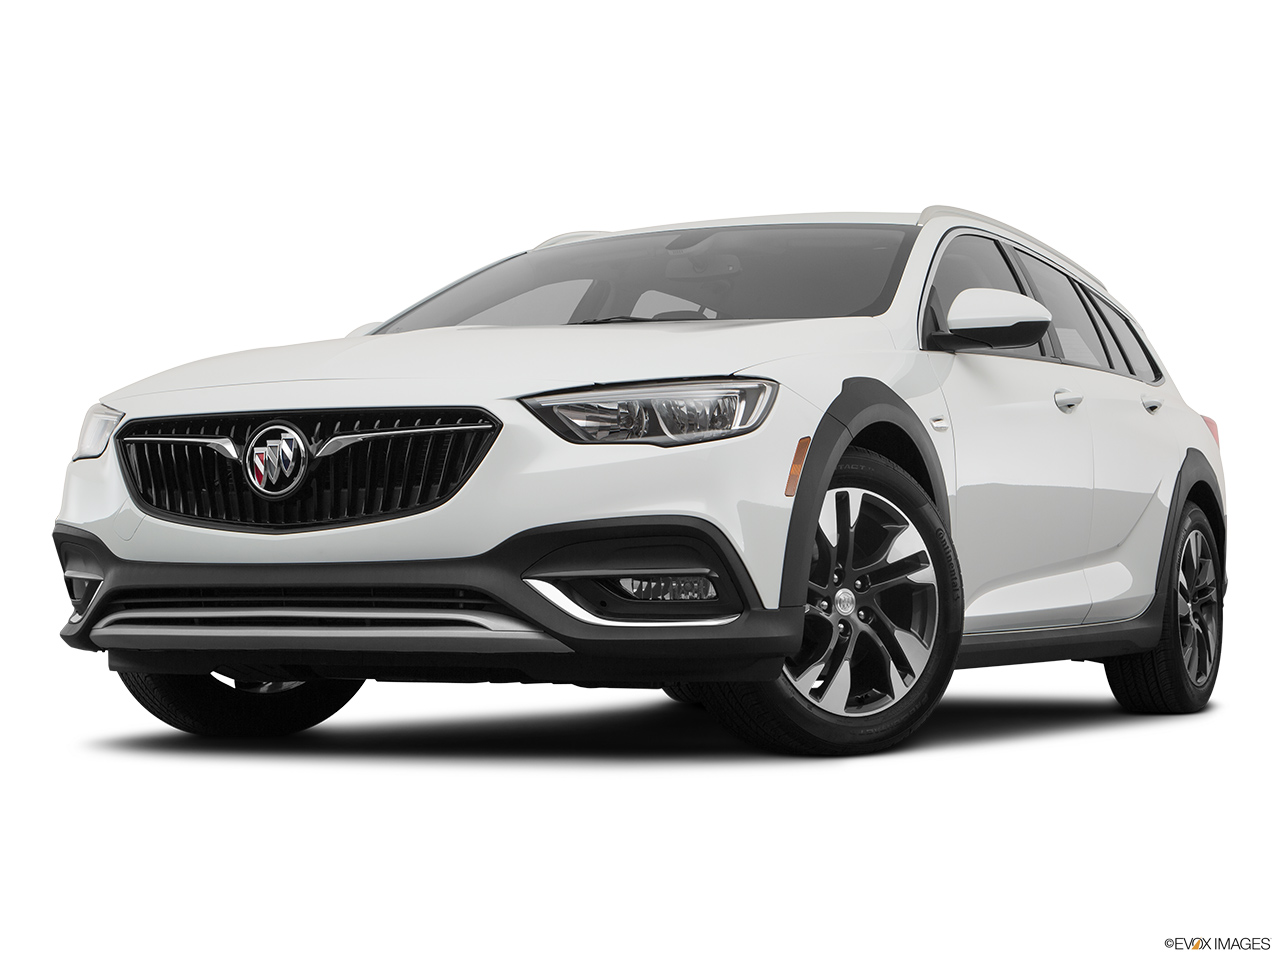 2018 Buick Regal Tourx  Preferred Front angle view, low wide perspective. 